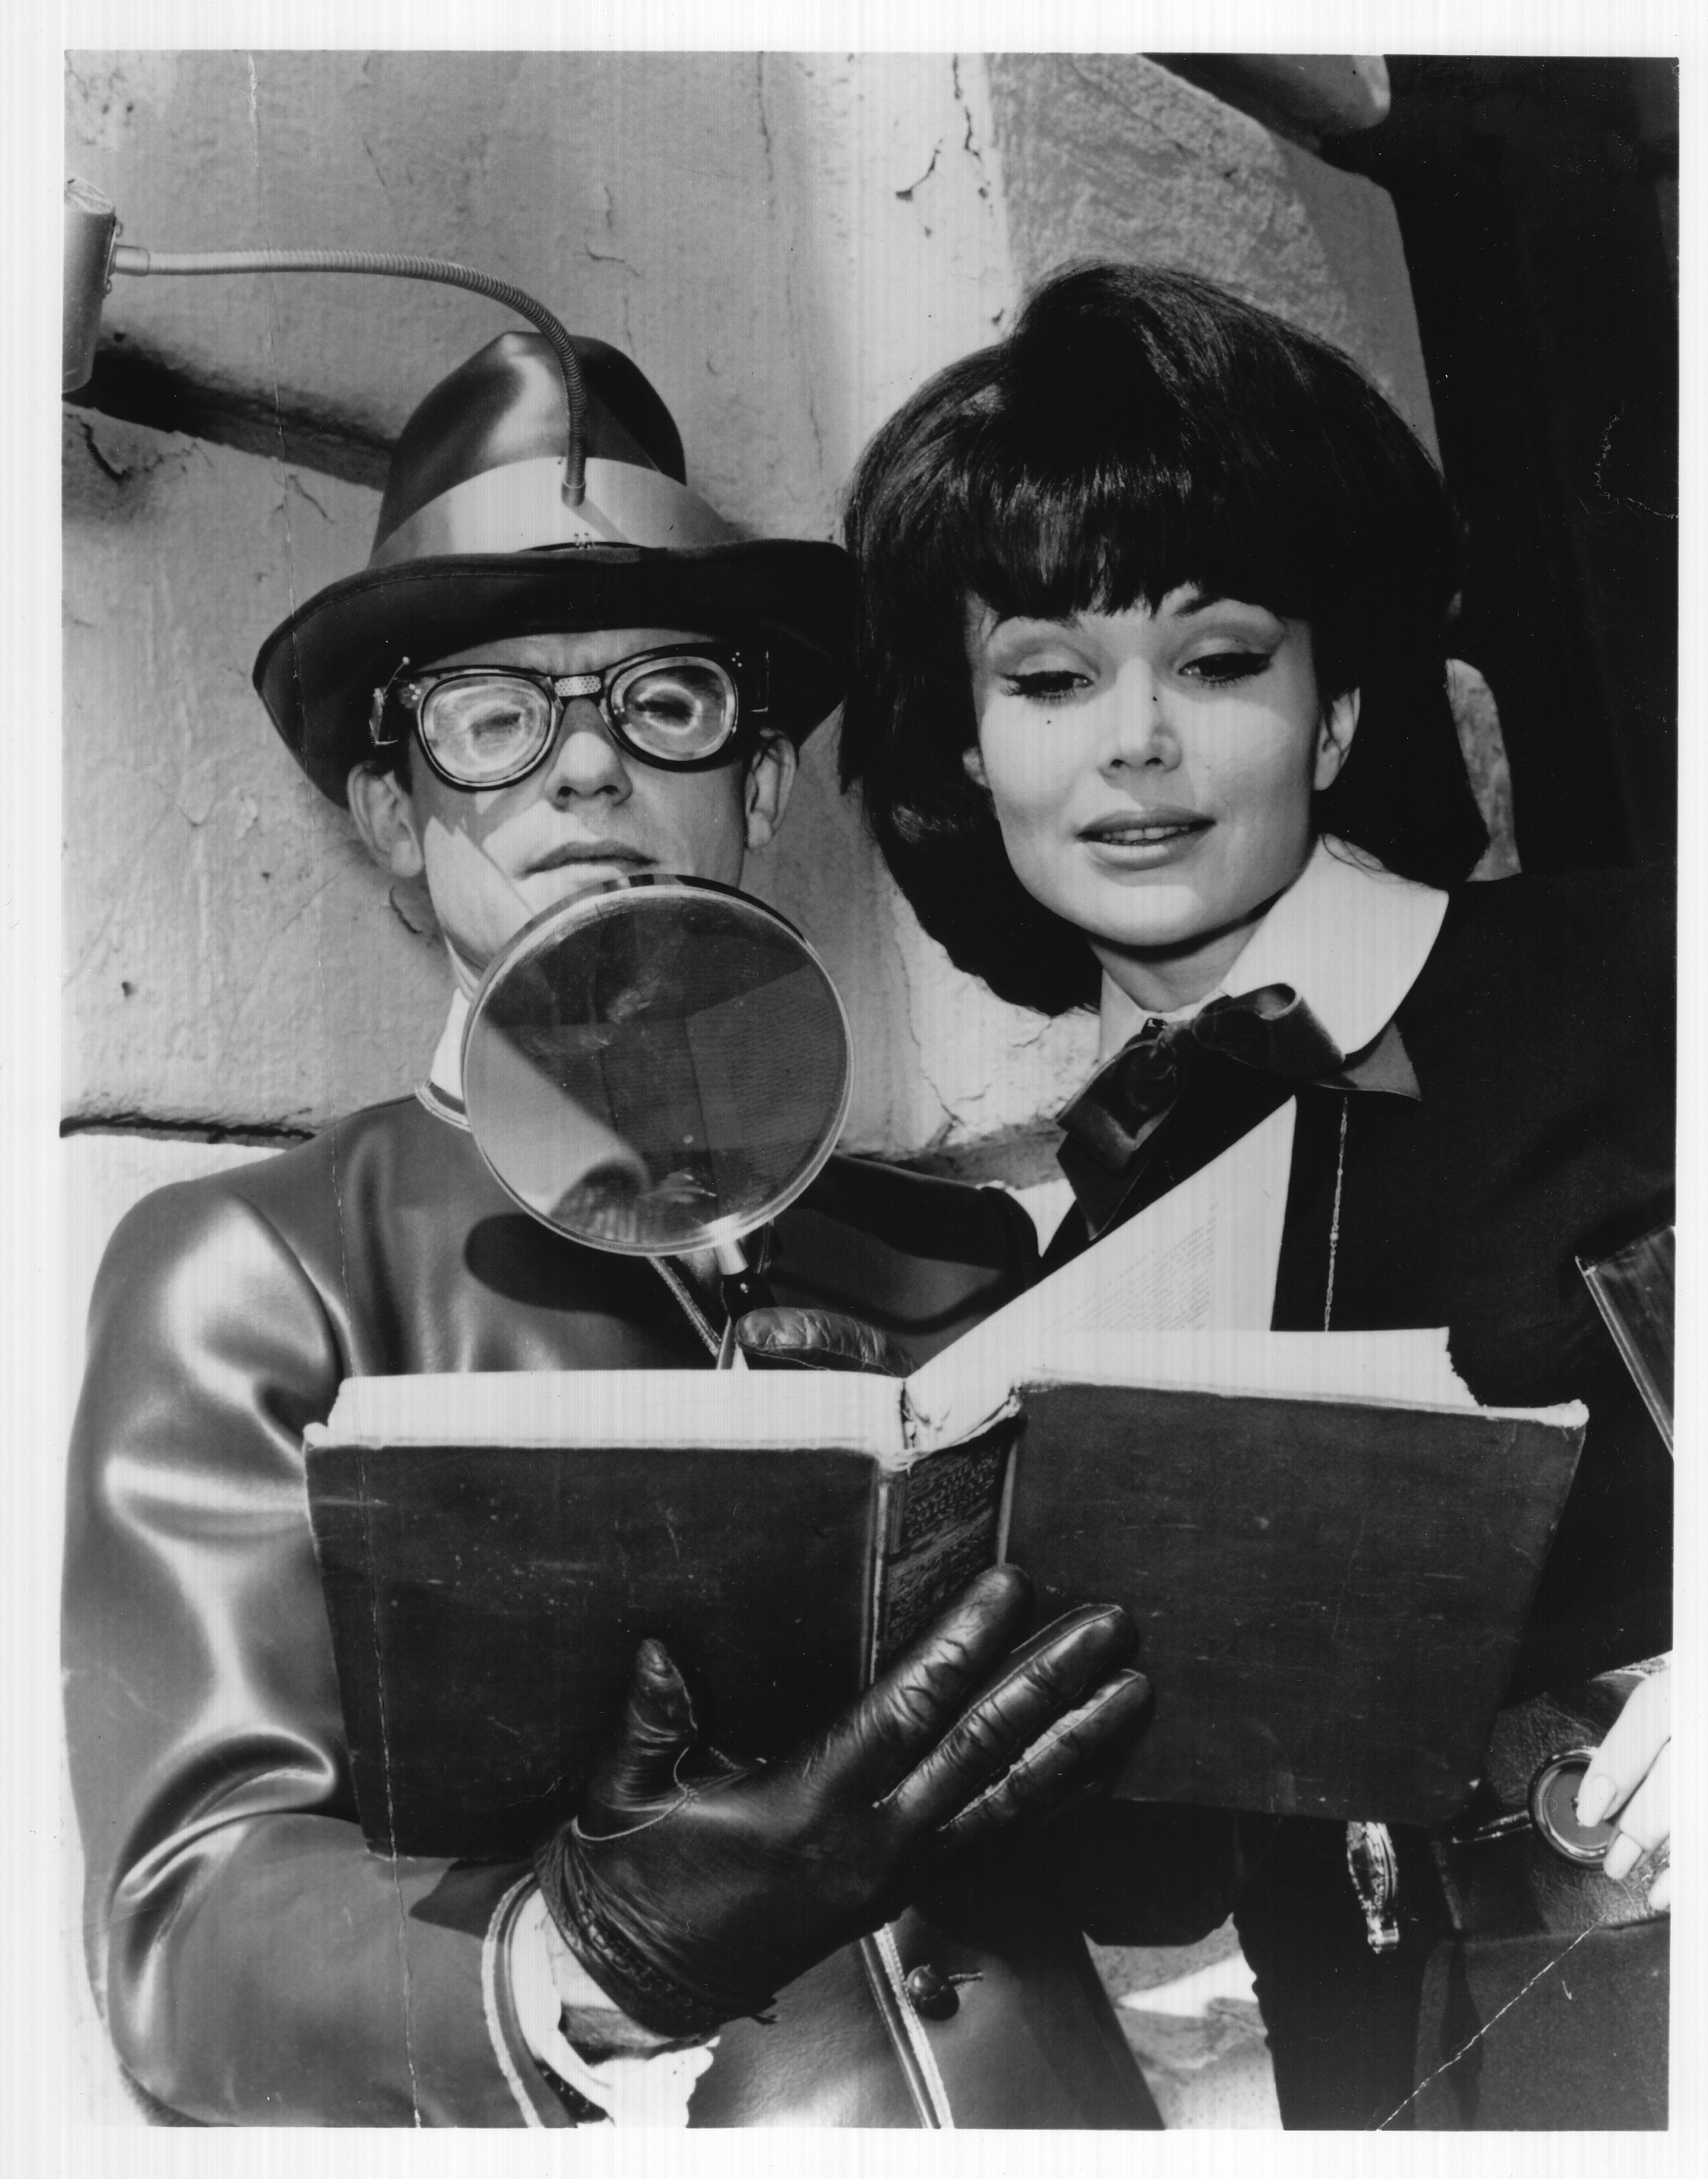 Francine York as Lydia Limpet with Roddy McDowell as Bookworm in 60s Batman.